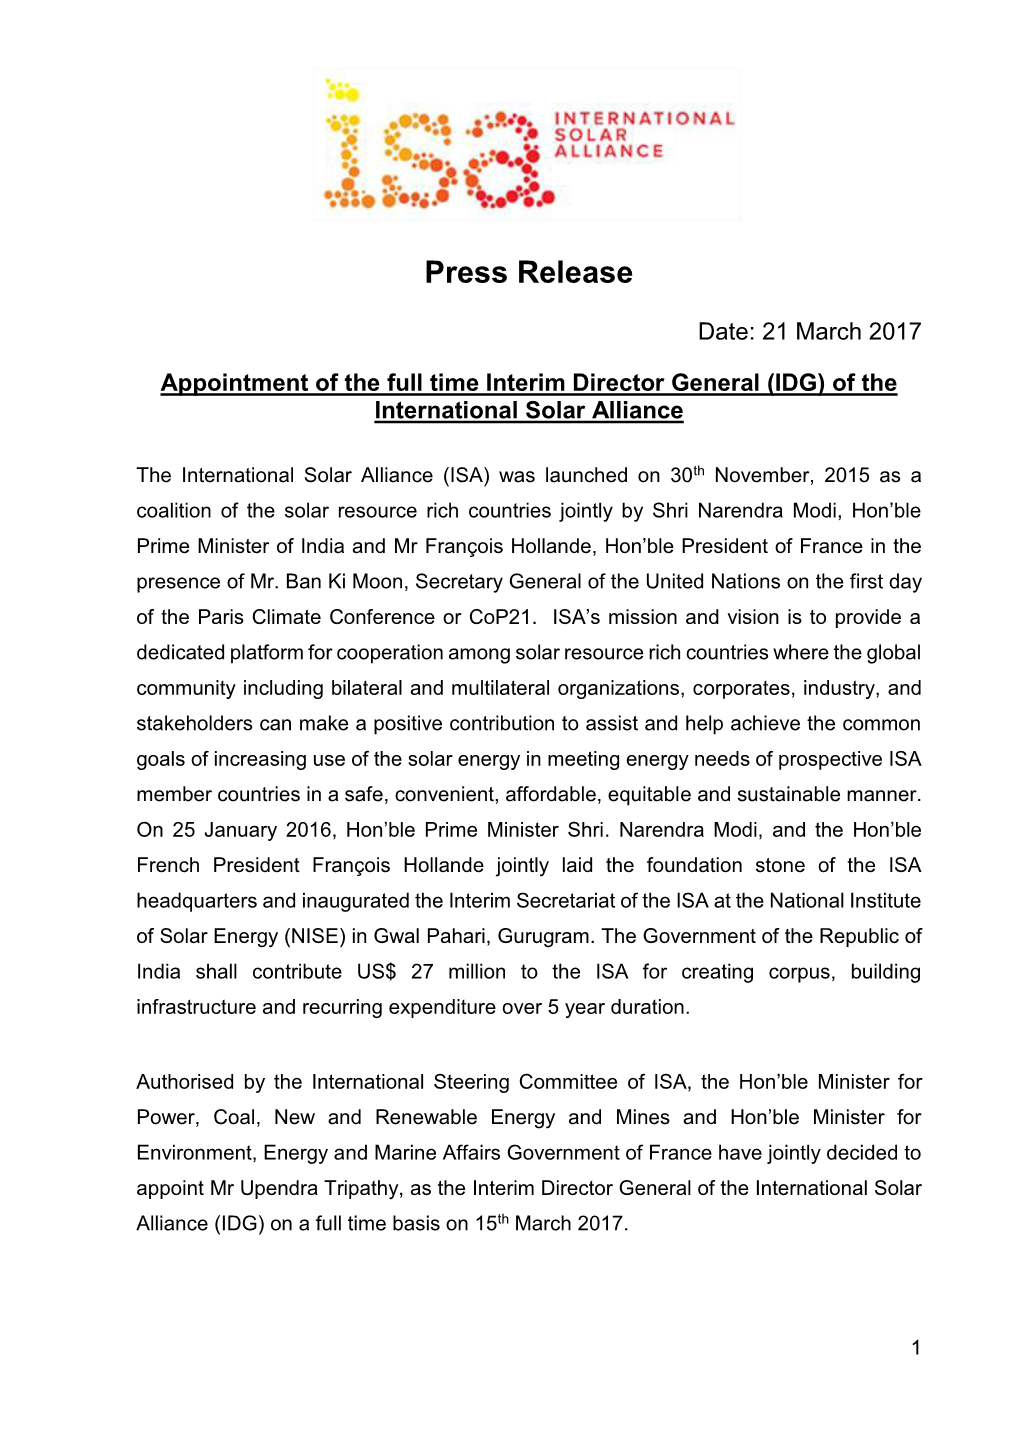 Appointment of Mr Upendra Tripathy As the Full Time Interim Director